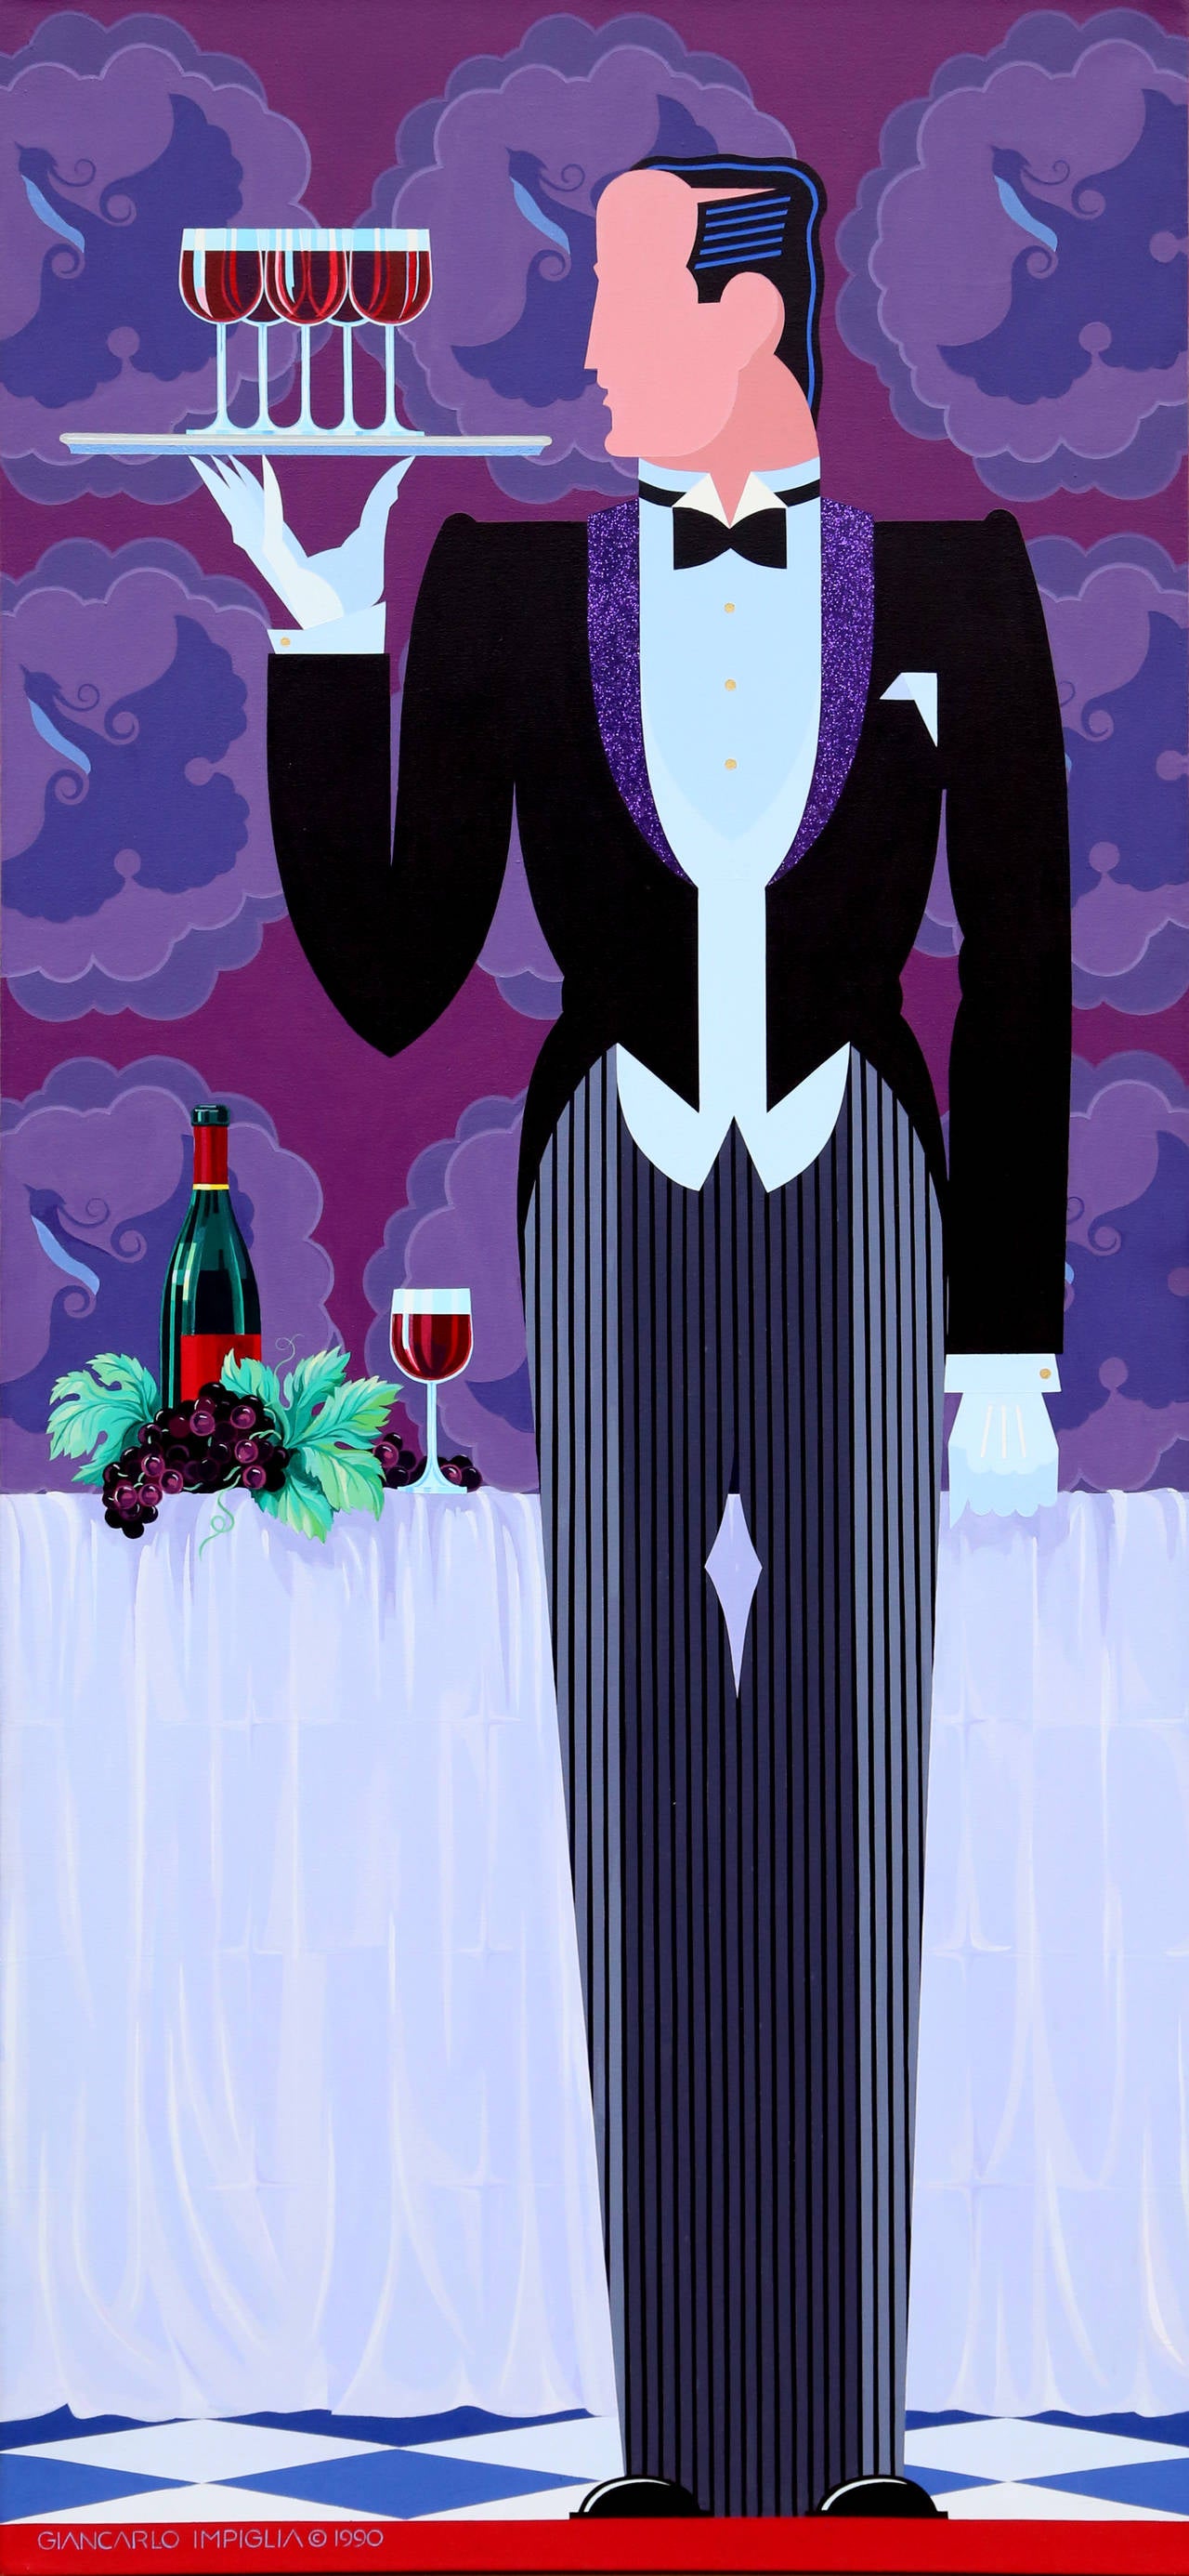 An acrylic painting by Giancarlo Impiglia from 1990. An art deco style pop art portrait of a waiter serving wine in a lavishly formal upper-class setting.
Unframed.  

Artist: Giancarlo Impiglia, American (1940 - )
Title: Butler with Tray with